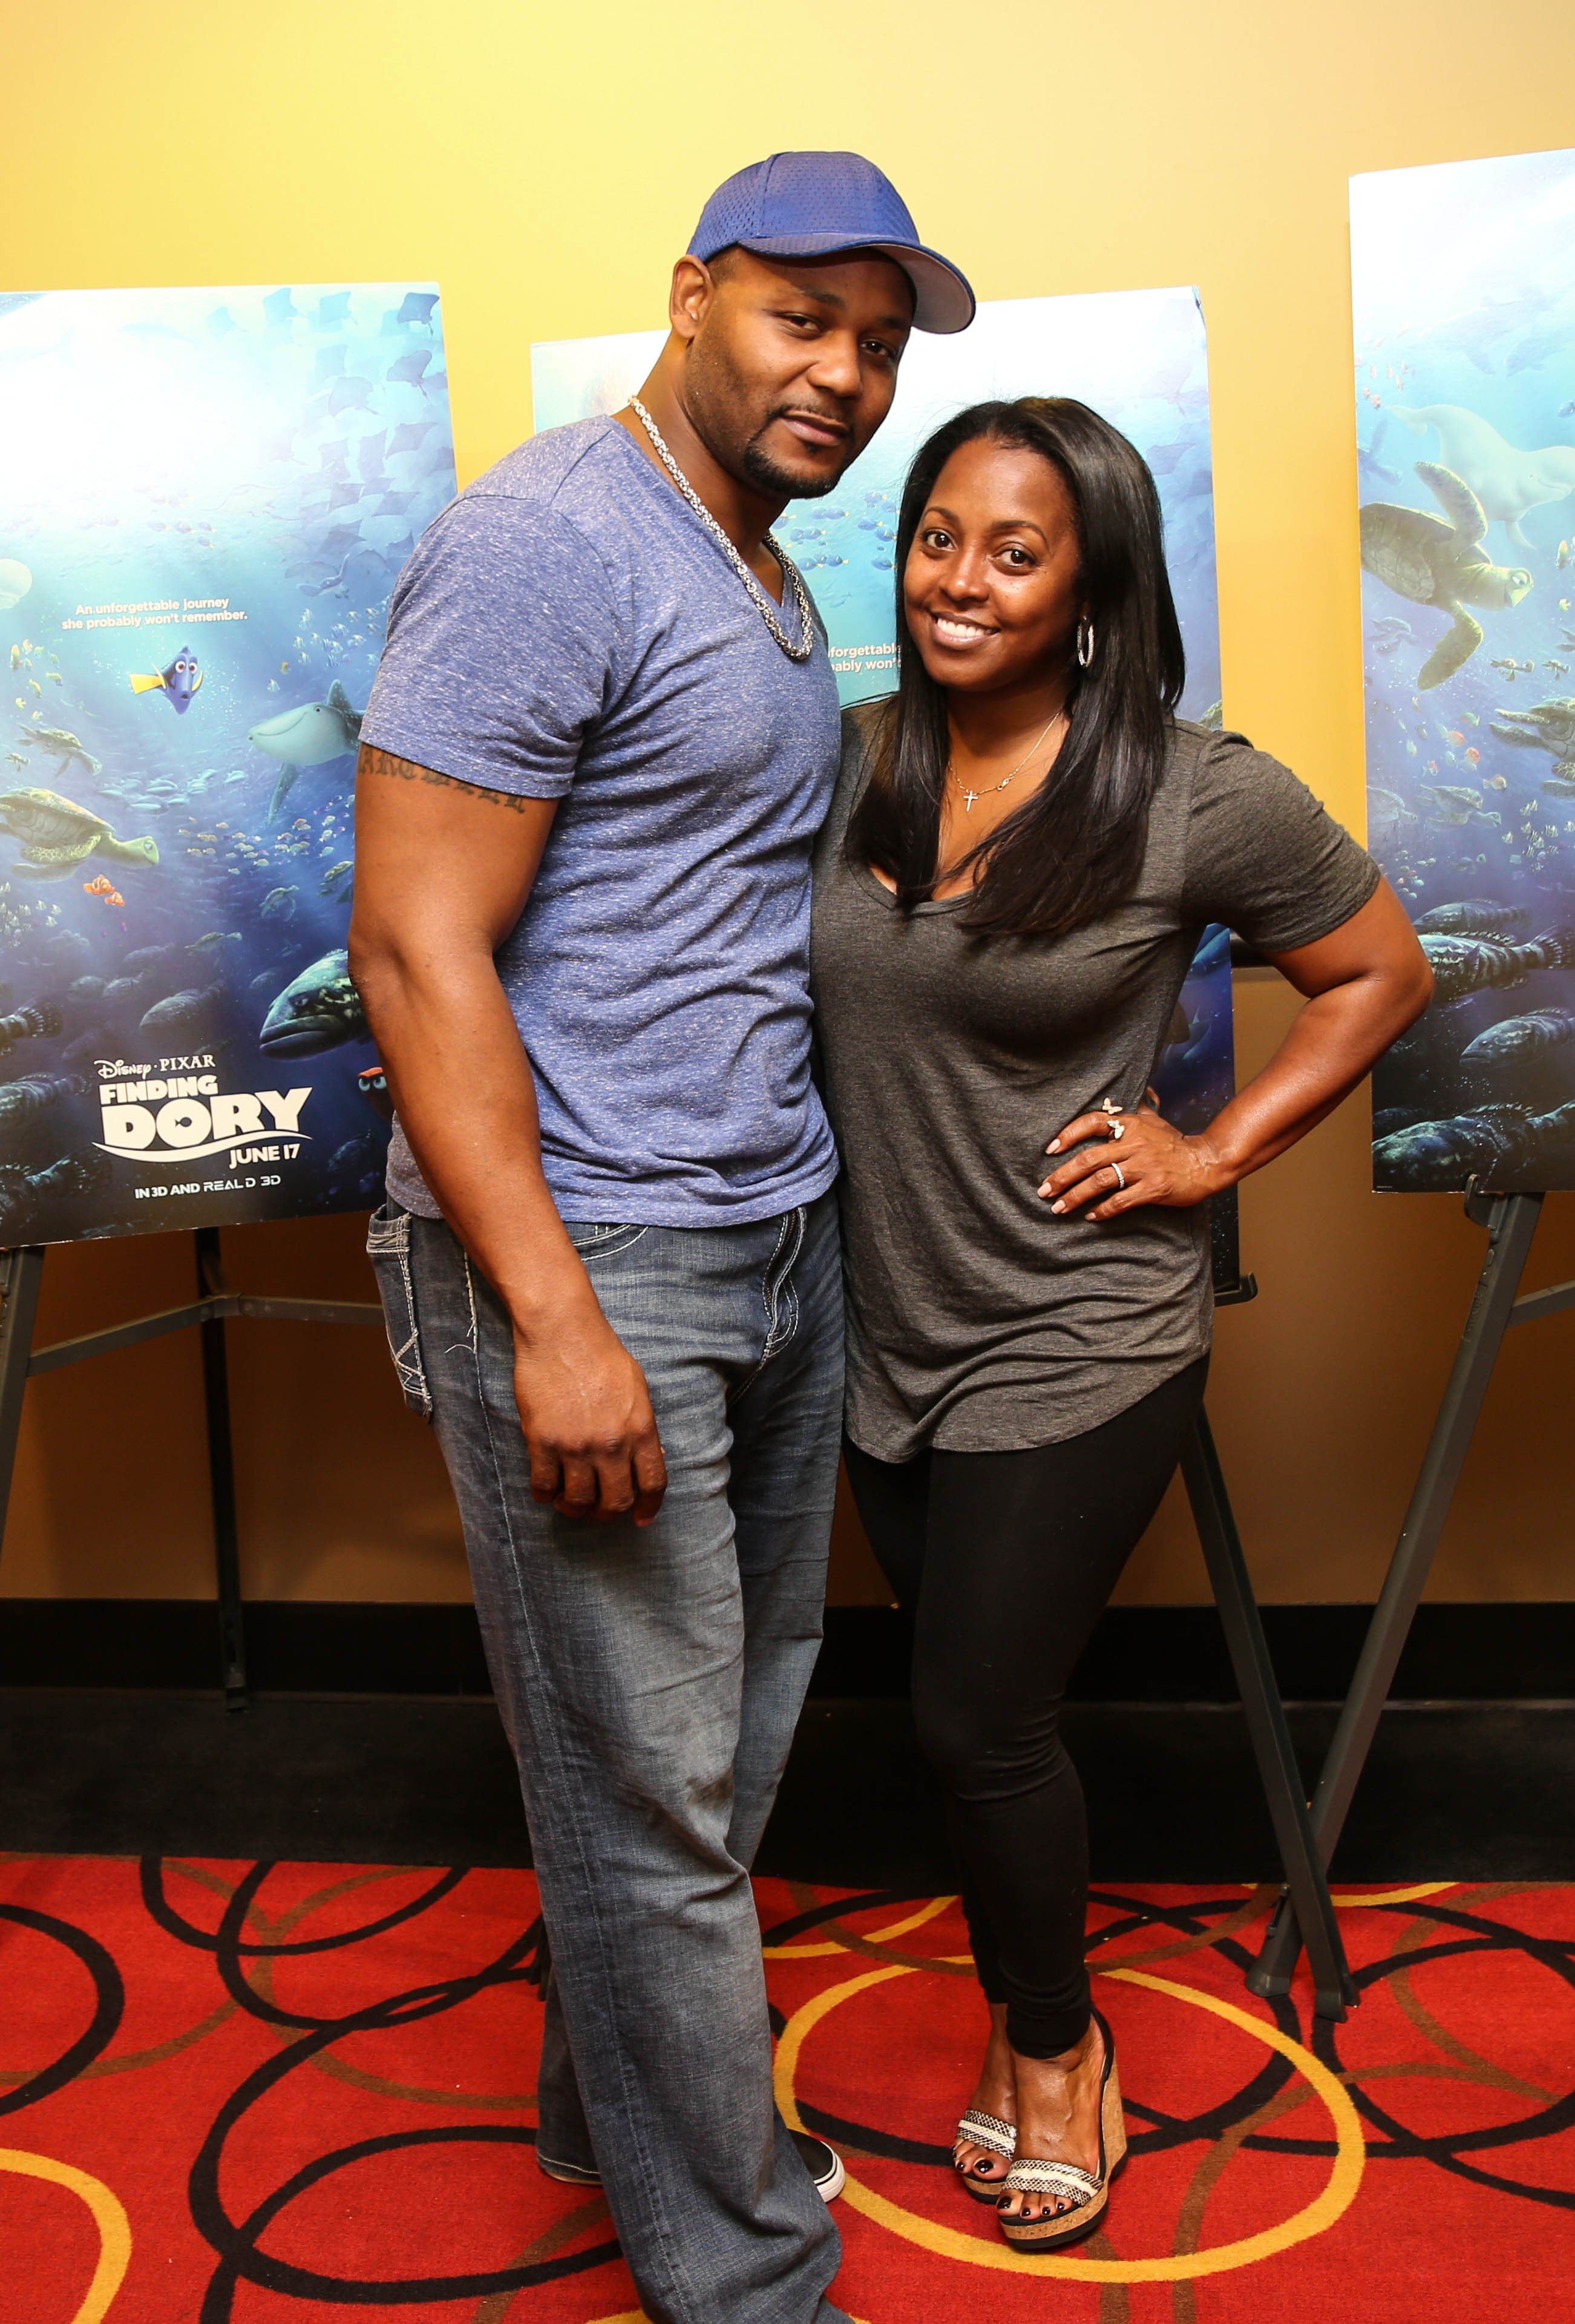 Keshia Knight Pulliam & Ed Hartwell at the advanced screening of “Finding Dory” in June 2016 | Source: Getty Images